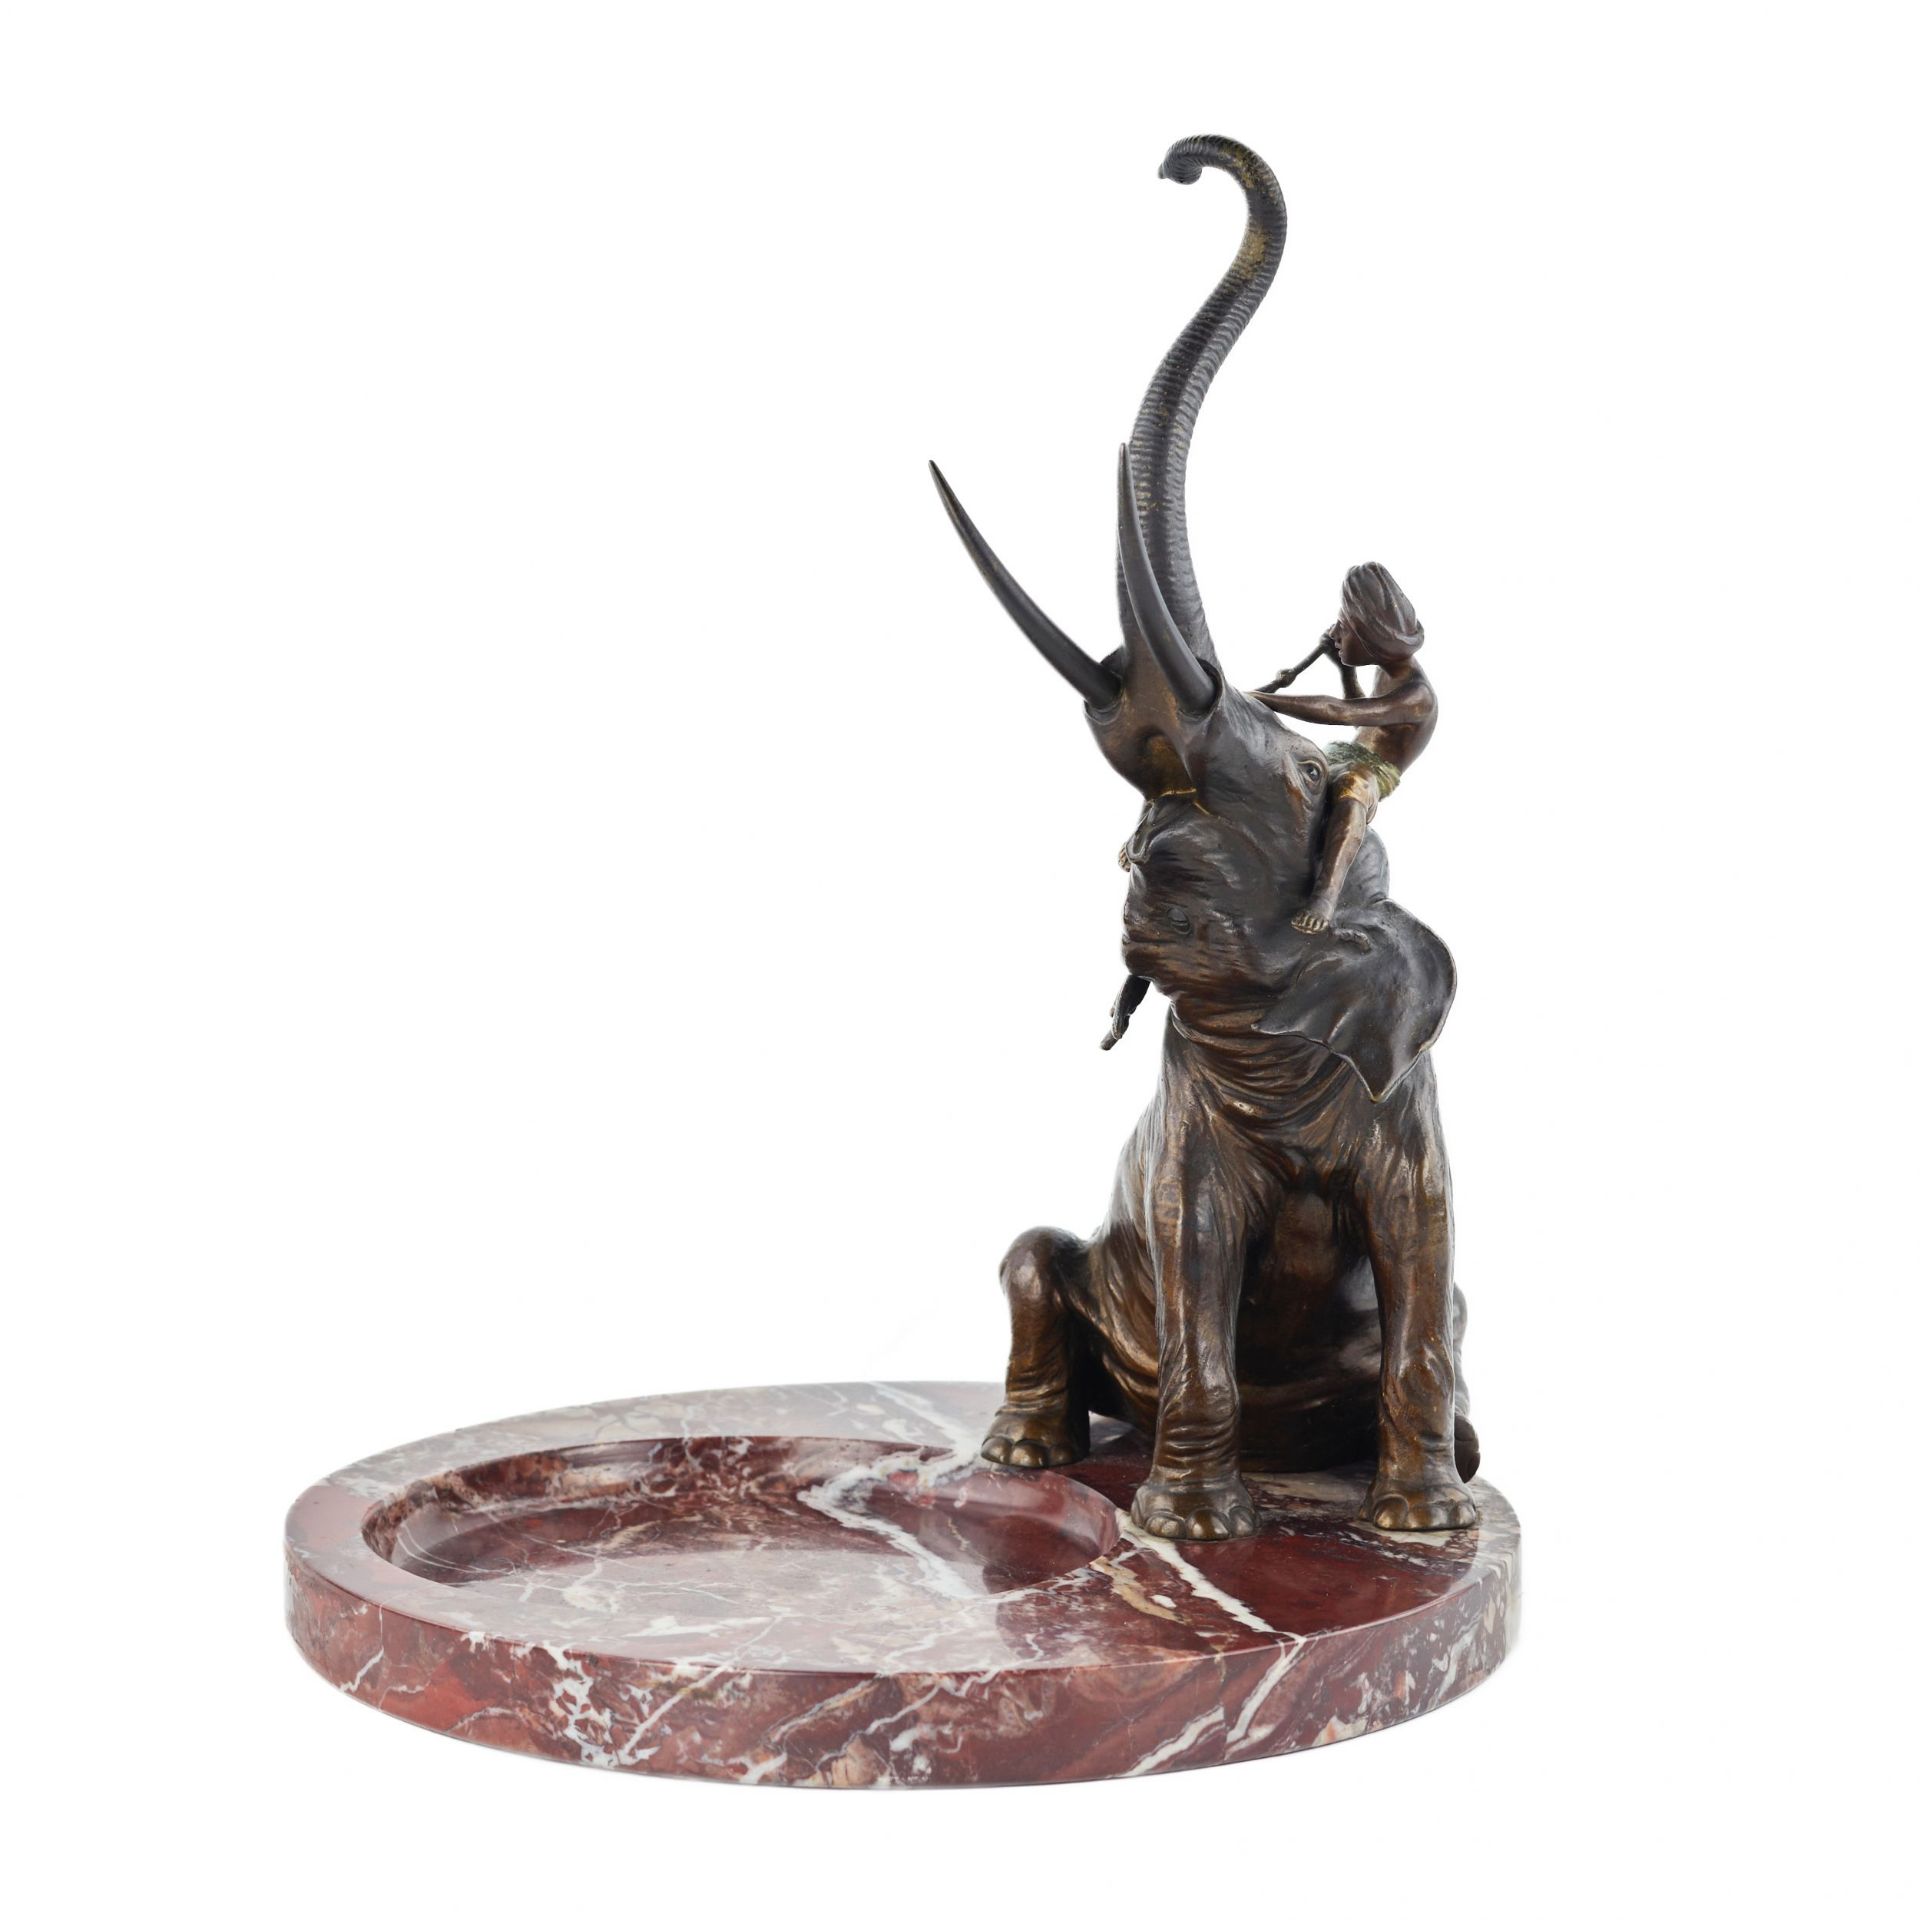 Franz Bergman. Decorative dish for small items made of marble, with a bronze figure of an elephant. - Bild 5 aus 5